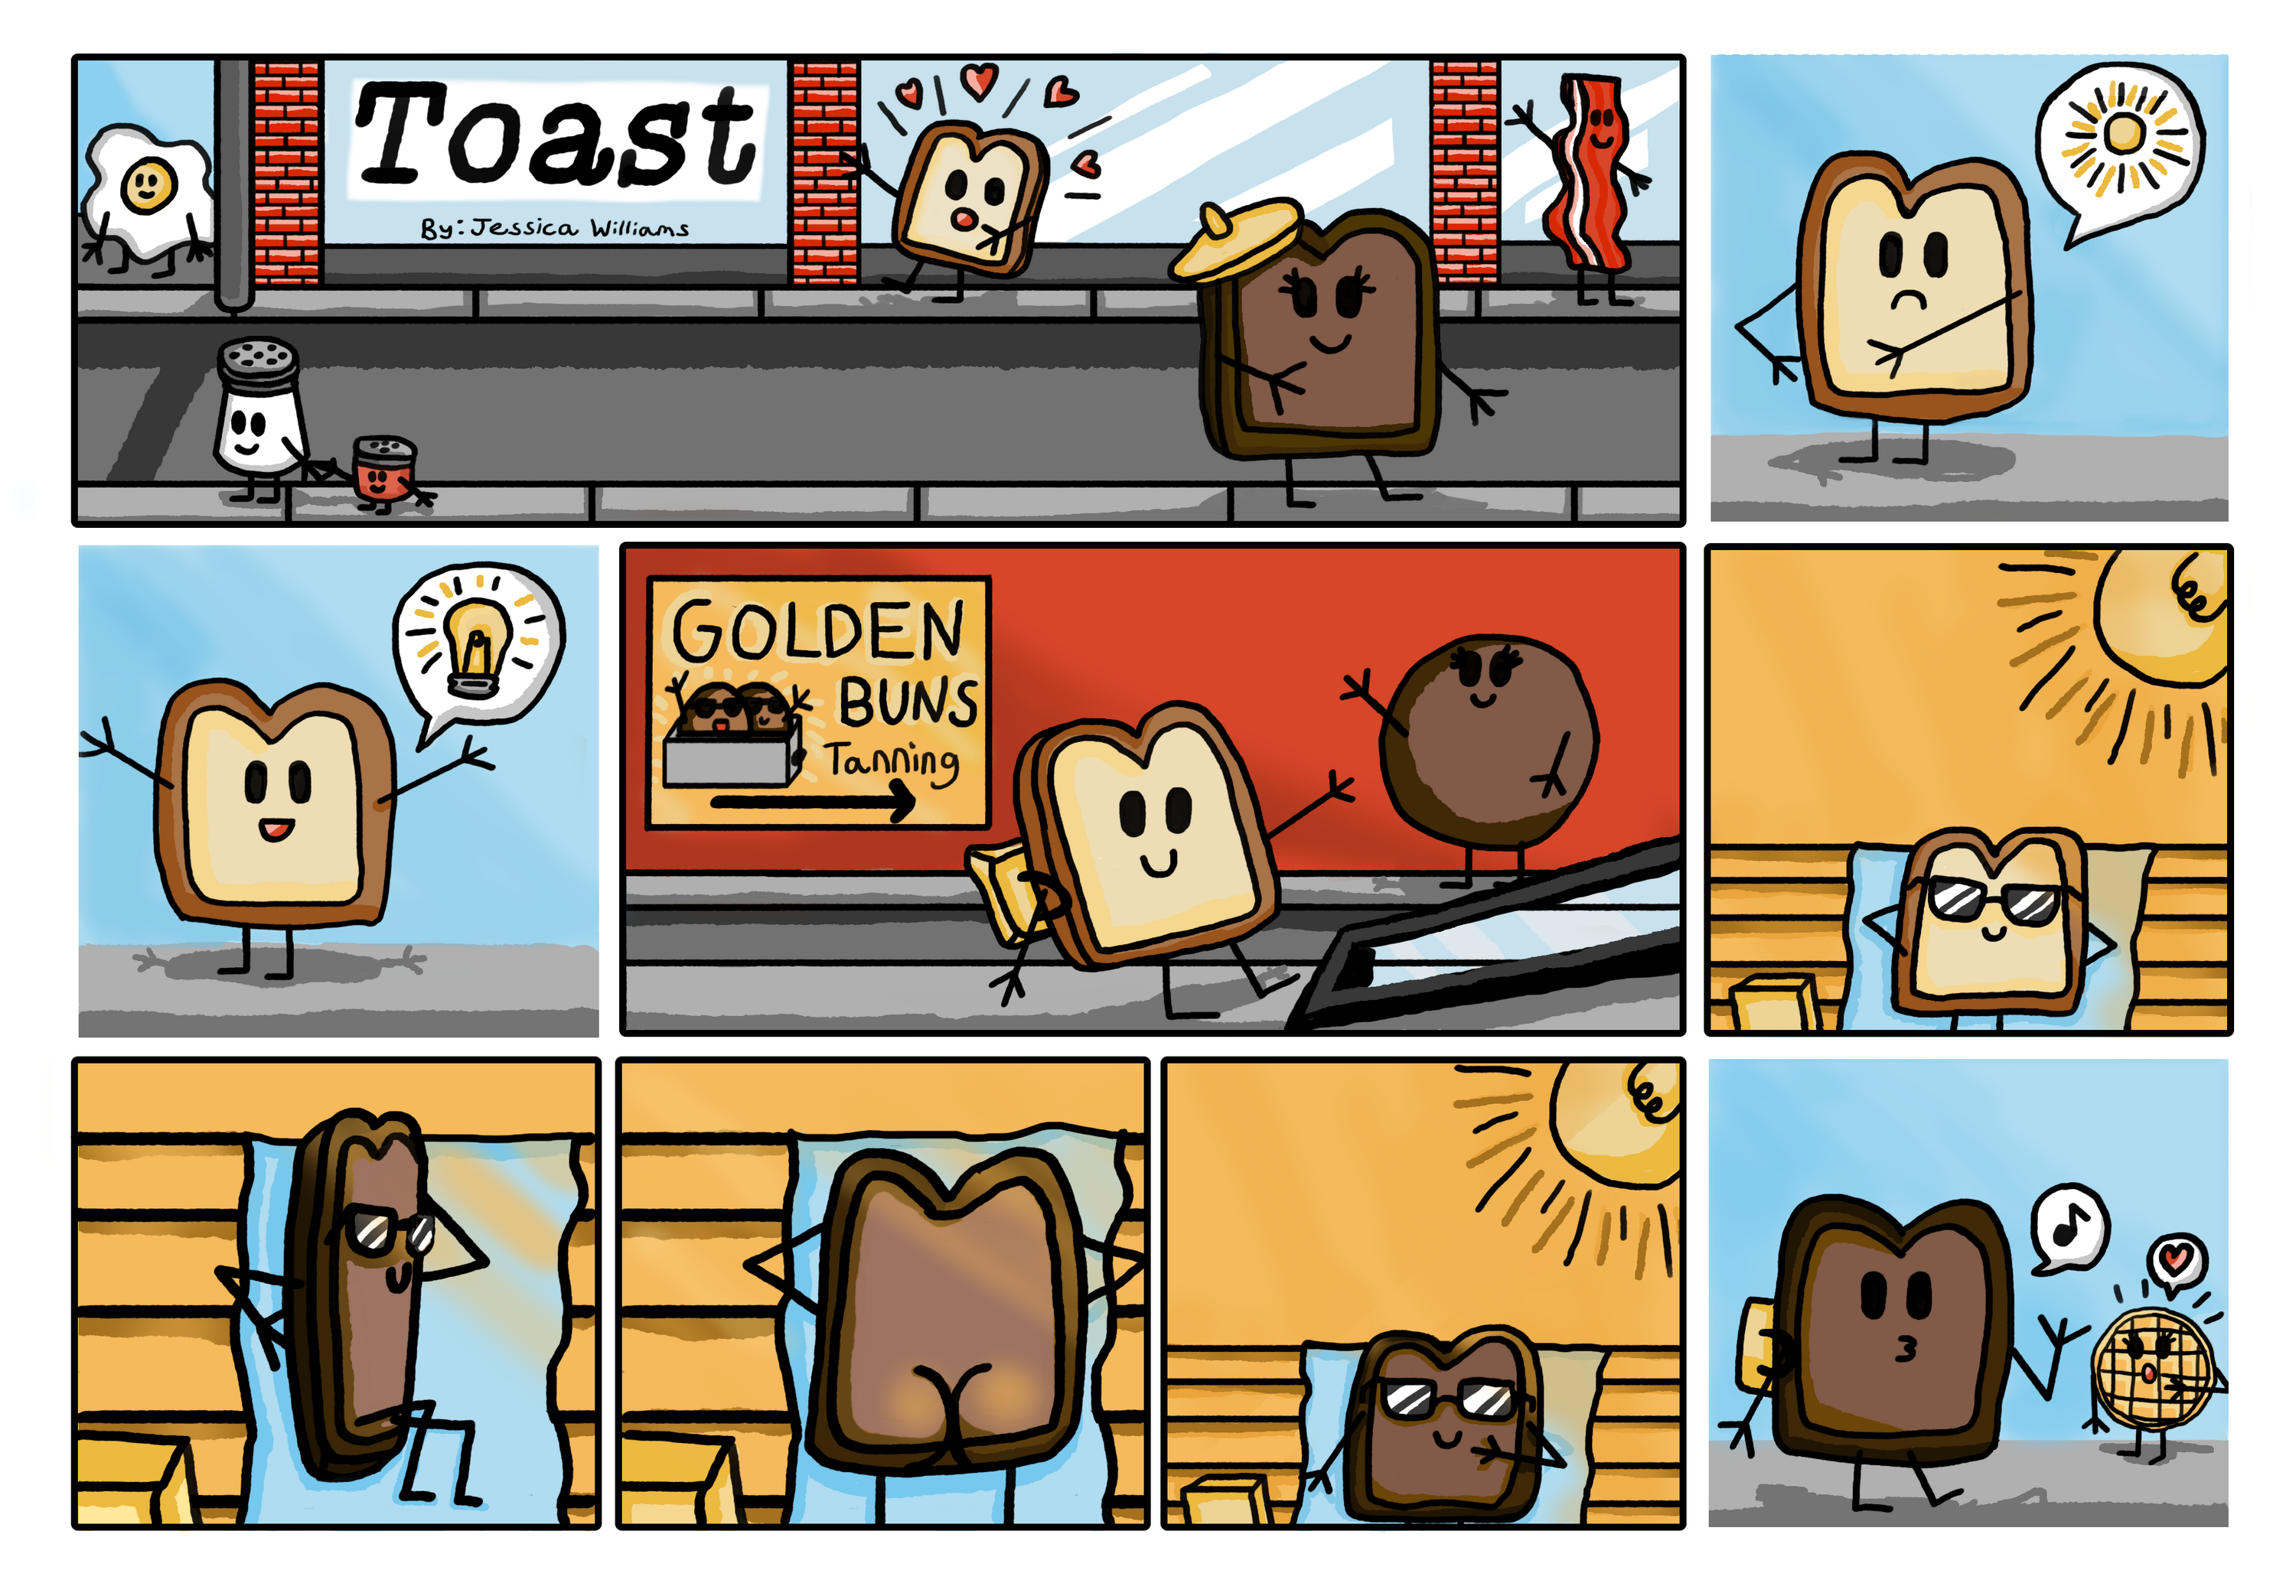 A slice of life, digital illustration comic about a slice of bread trying to impress his crush, French toast, with a new suntan. You can say he's...<i>toast</i>.